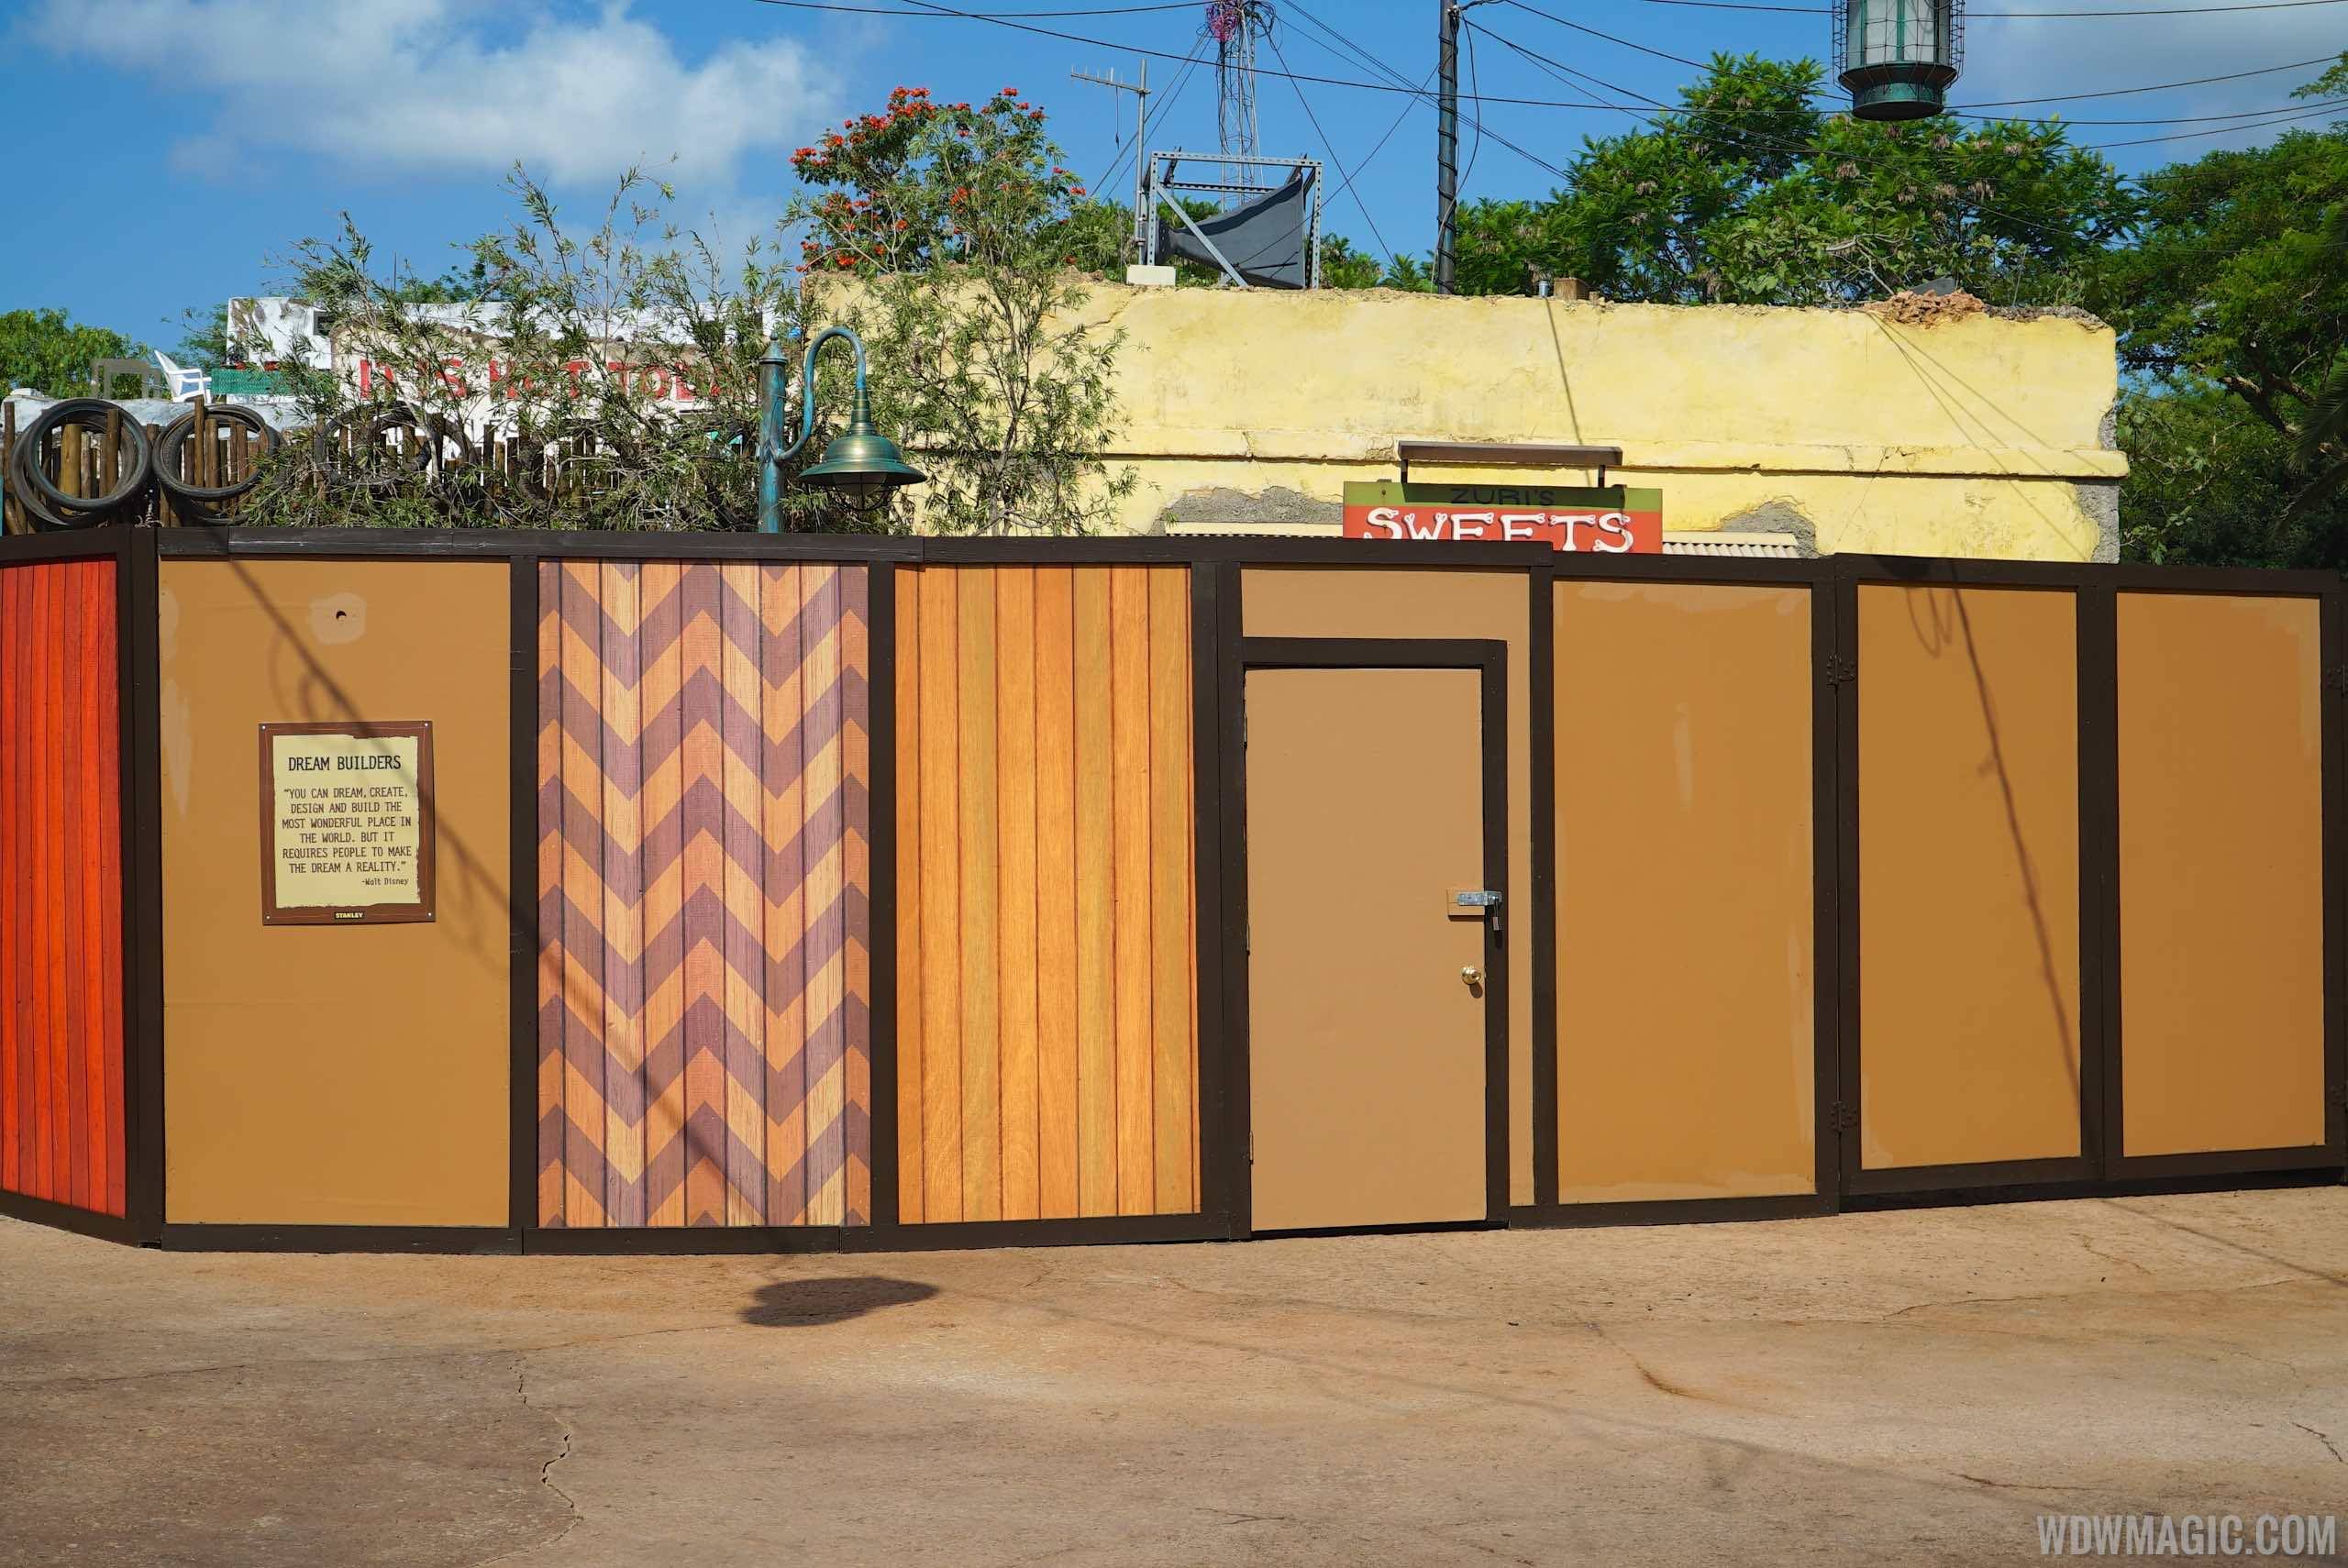 PHOTOS - Zuri's Sweets to open soon in the new Harambe Market